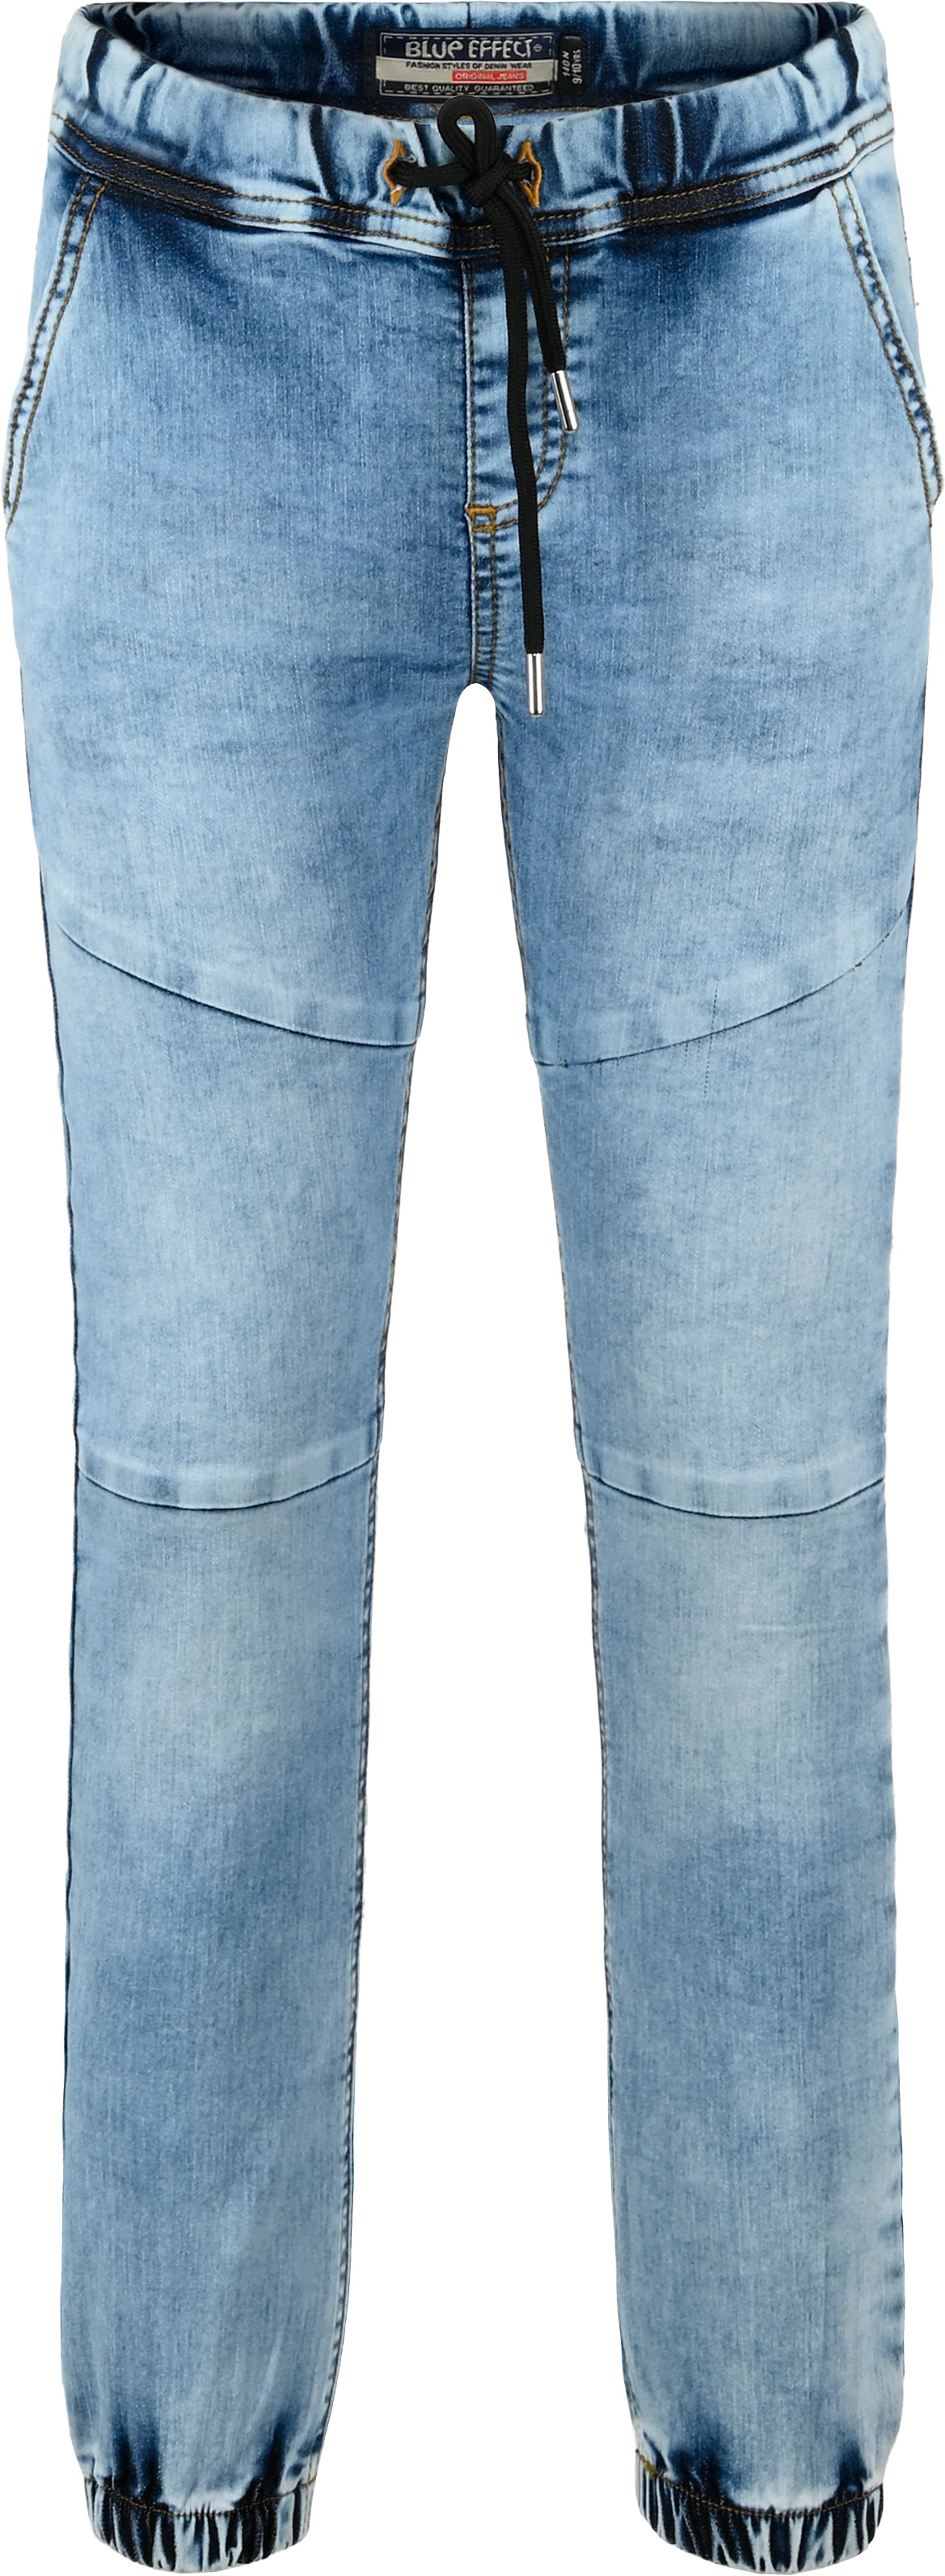 2837-Boys Jean Joggpant Ultrastretch, available in Normal